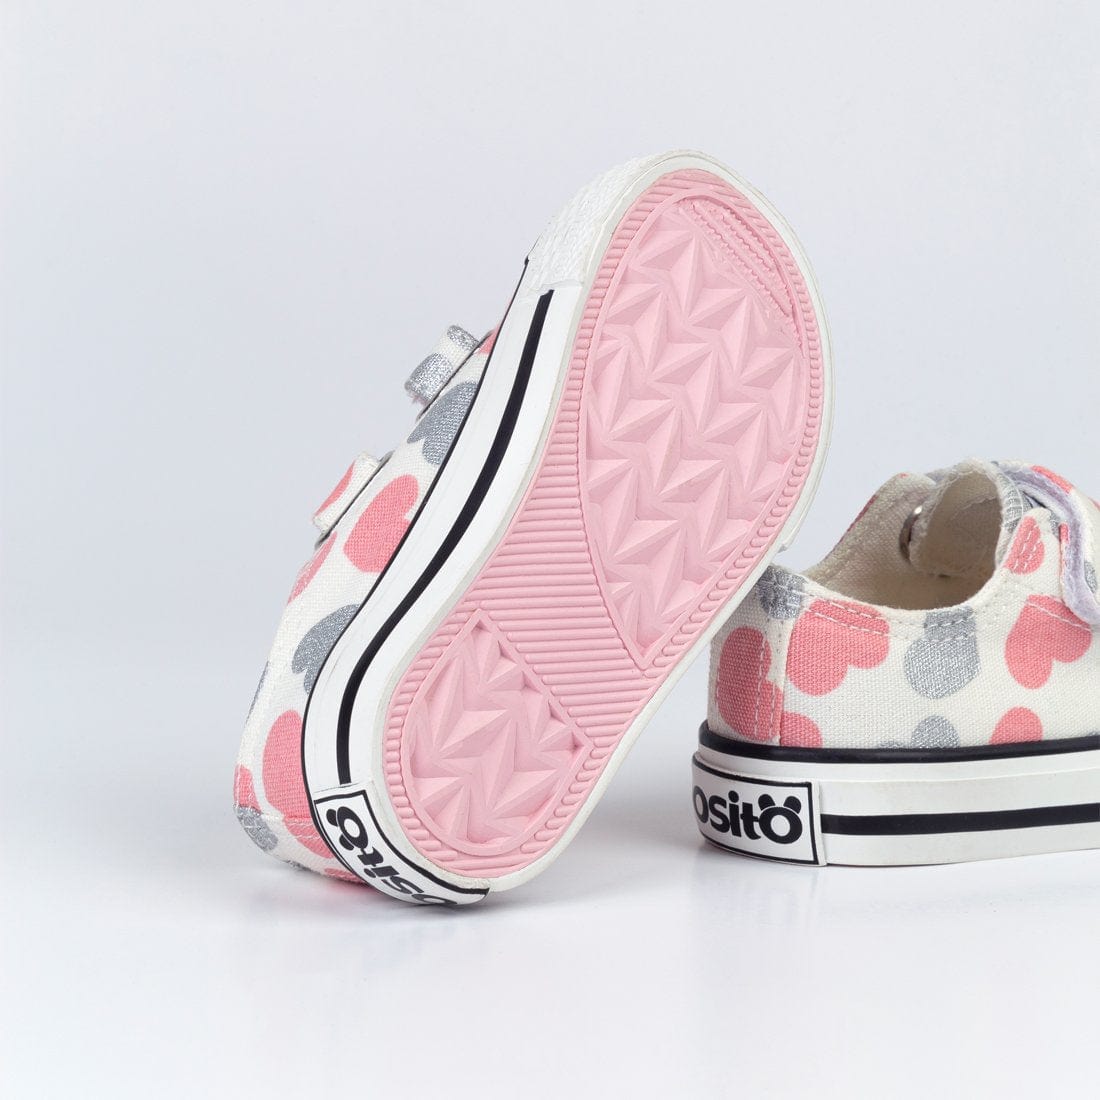 OSITO Shoes Baby's Hearts White Canvas Sneakers